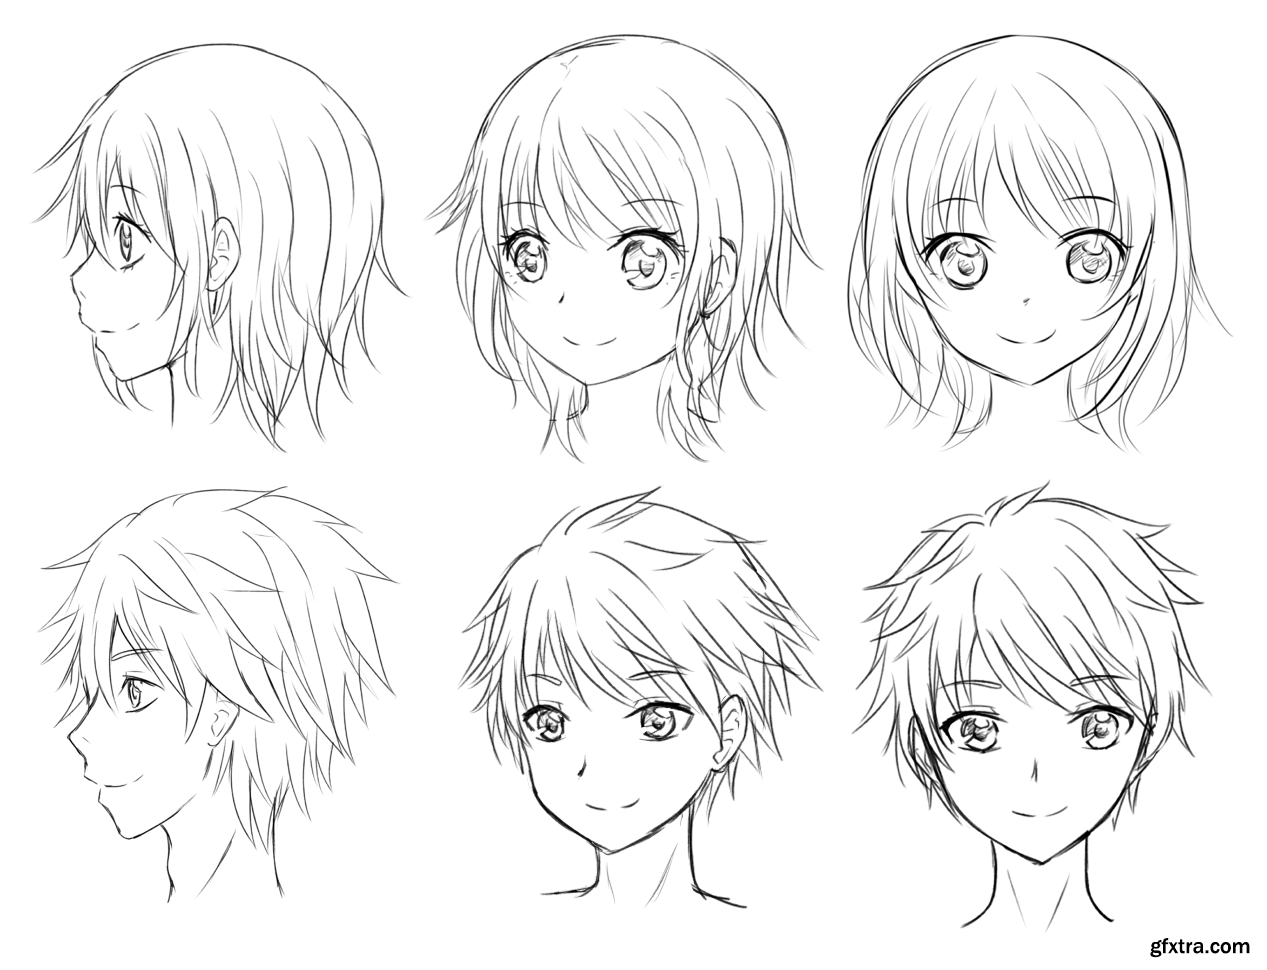 Anime Drawing for Beginners » GFxtra